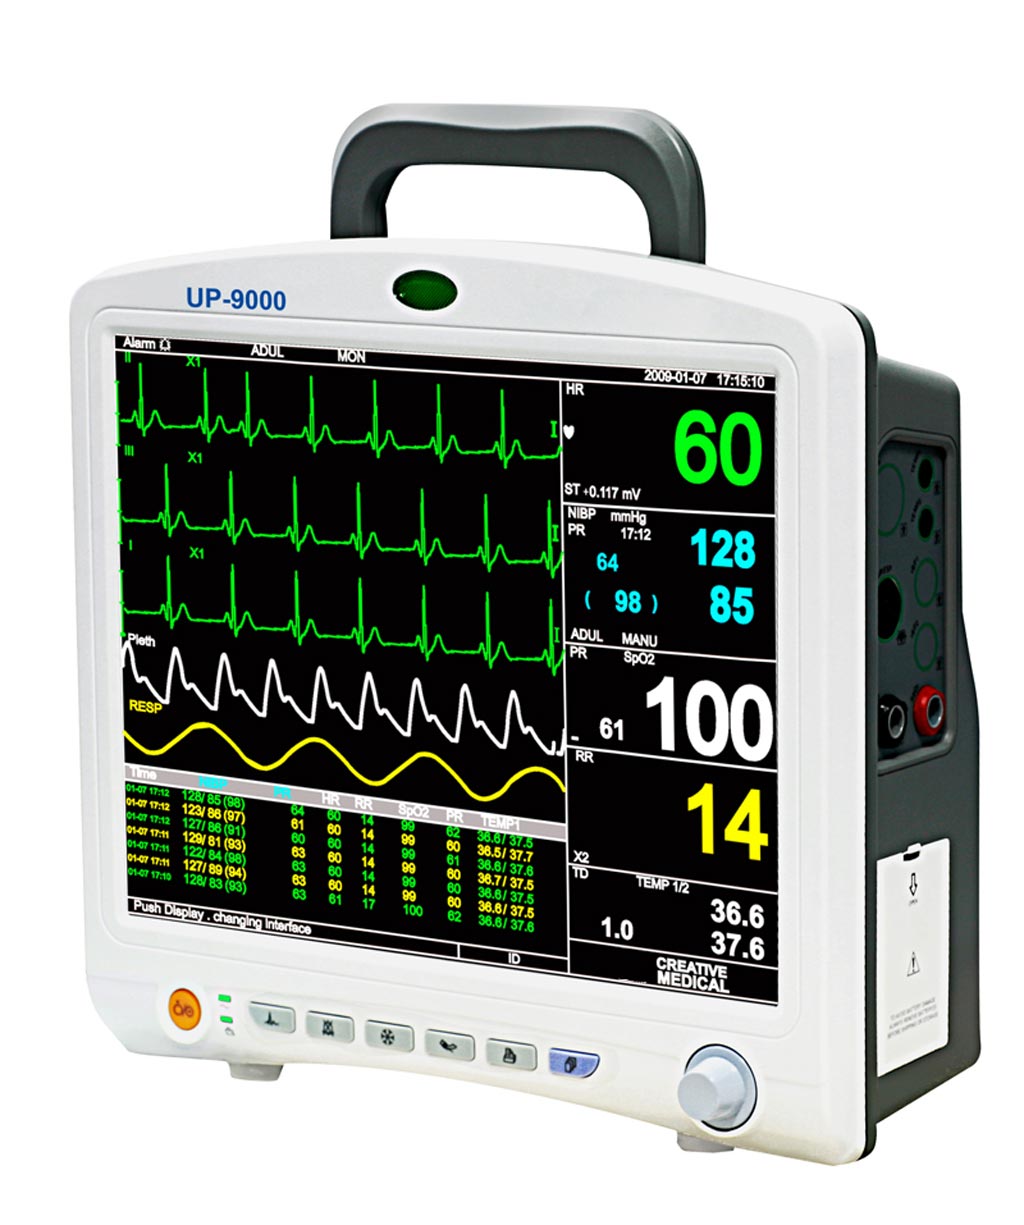 Image: The global multi-parameter patient monitoring market is expected to reach USD 6 billion by the end of 2028 (Photo courtesy of CMI Health).